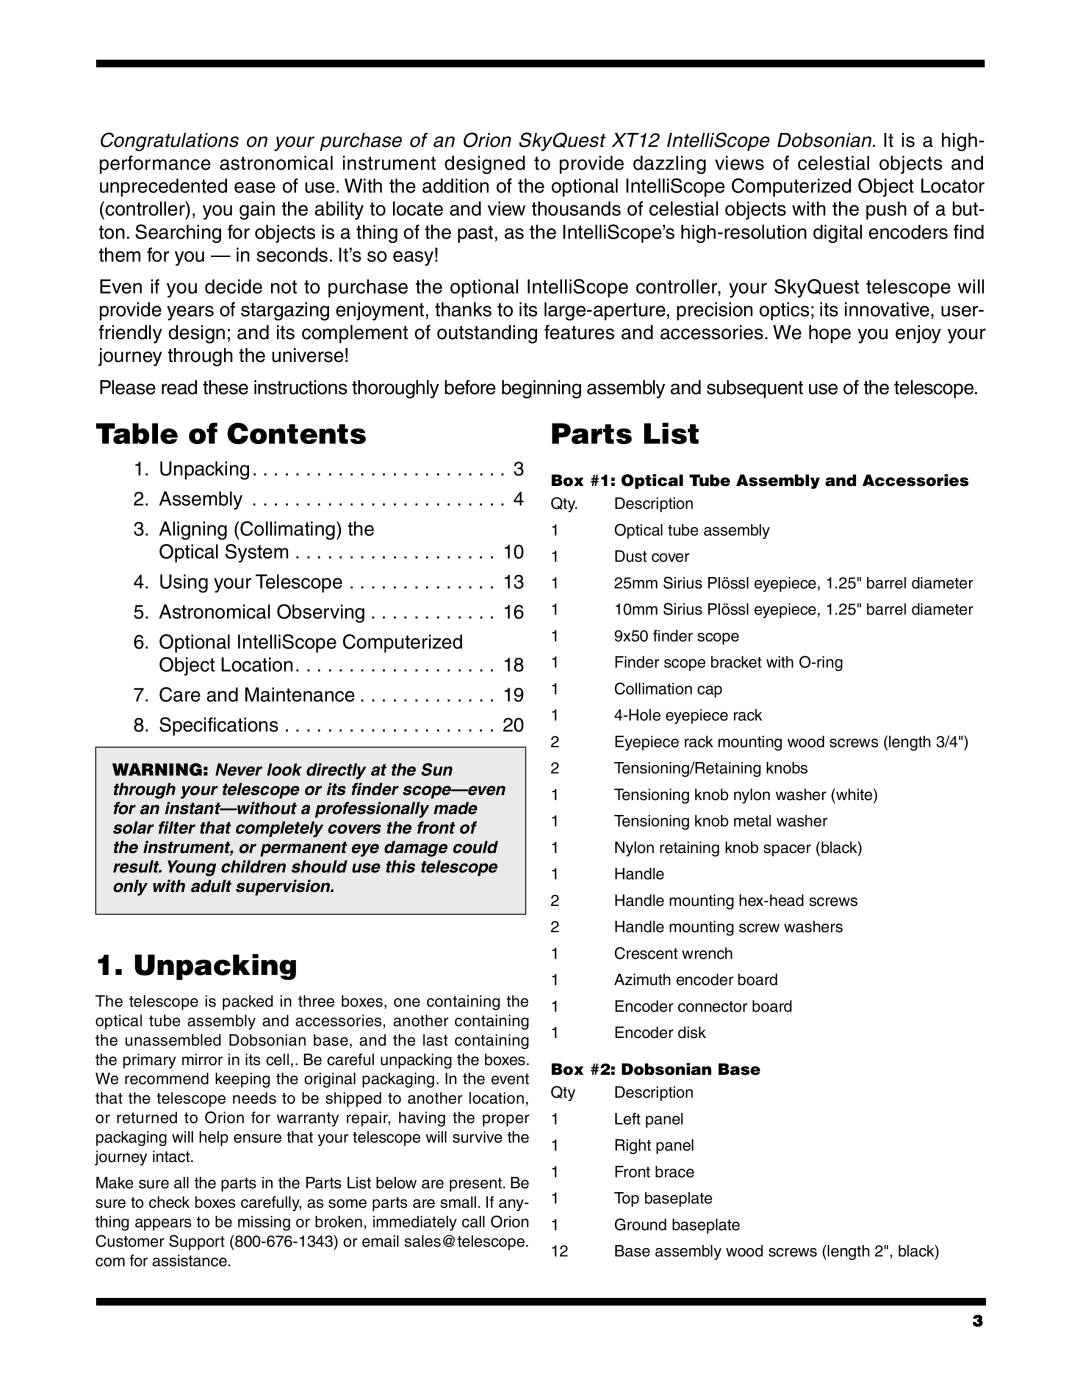 Orion XT12 instruction manual Table of Contents, Unpacking, Parts List 